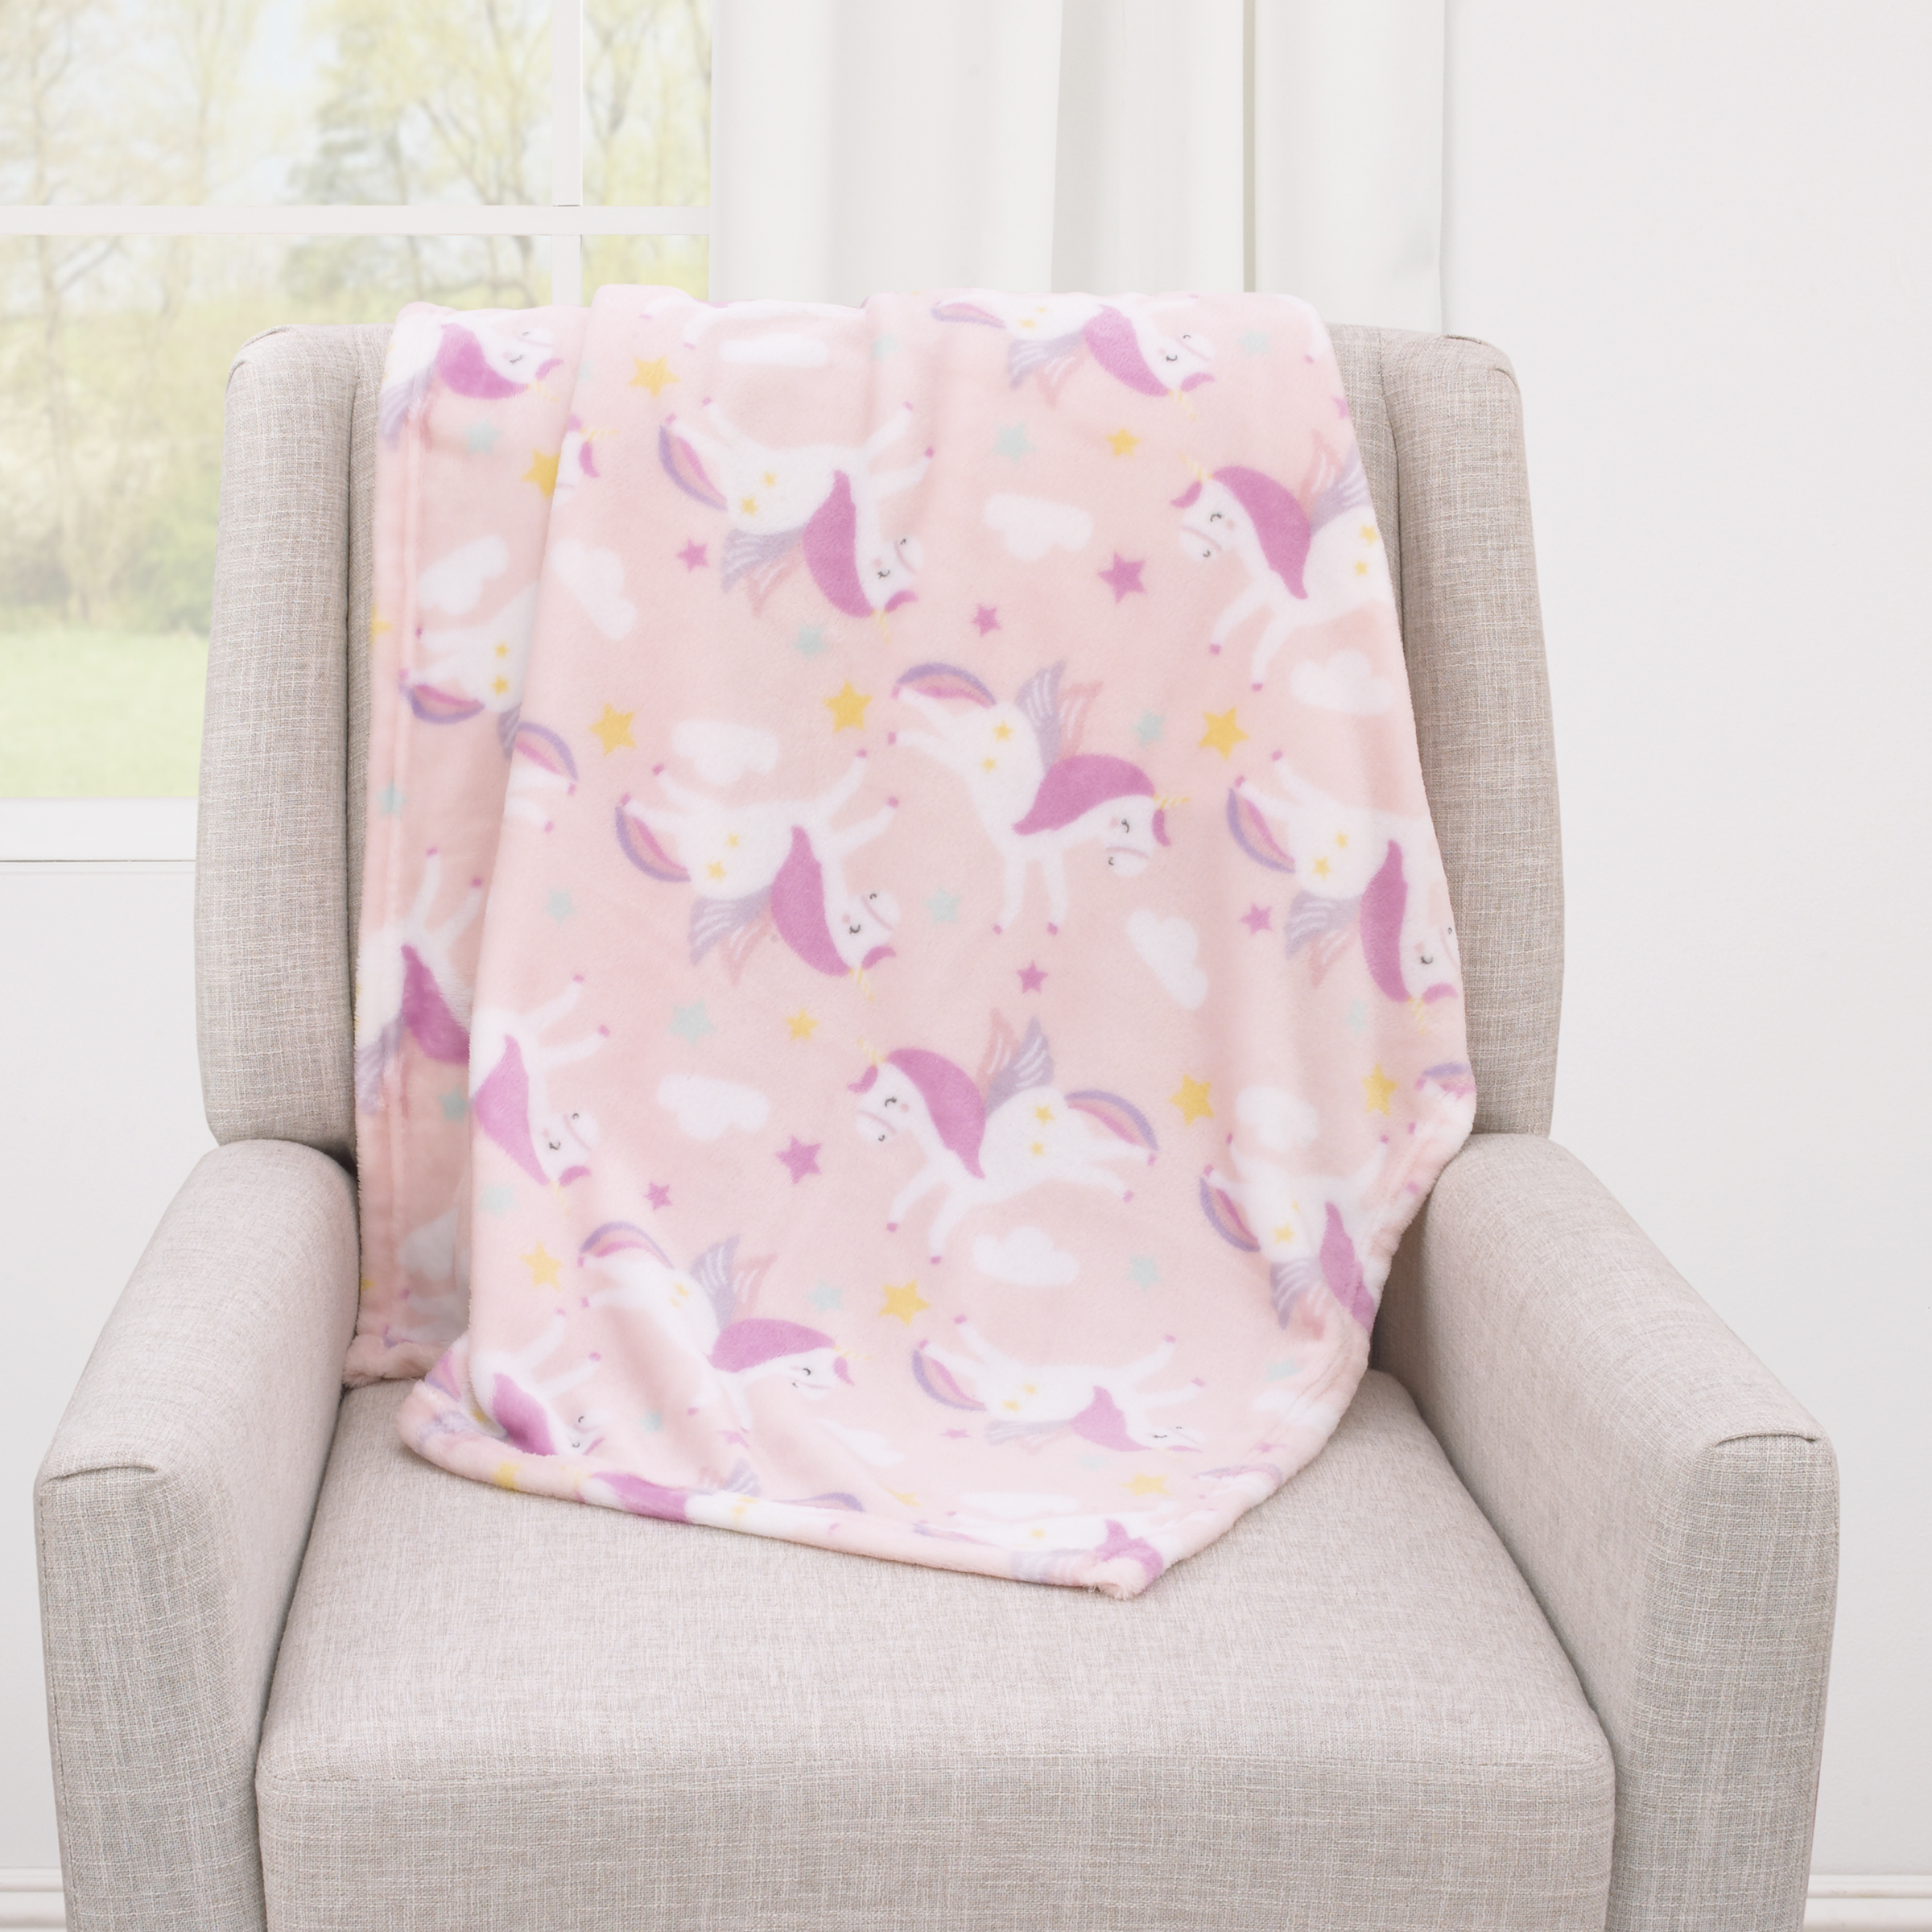 Parent's Choice Plush Baby Blanket, Pink Unicorn Print, 30x36 inches, Pink, White, Infant Girl - image 5 of 7